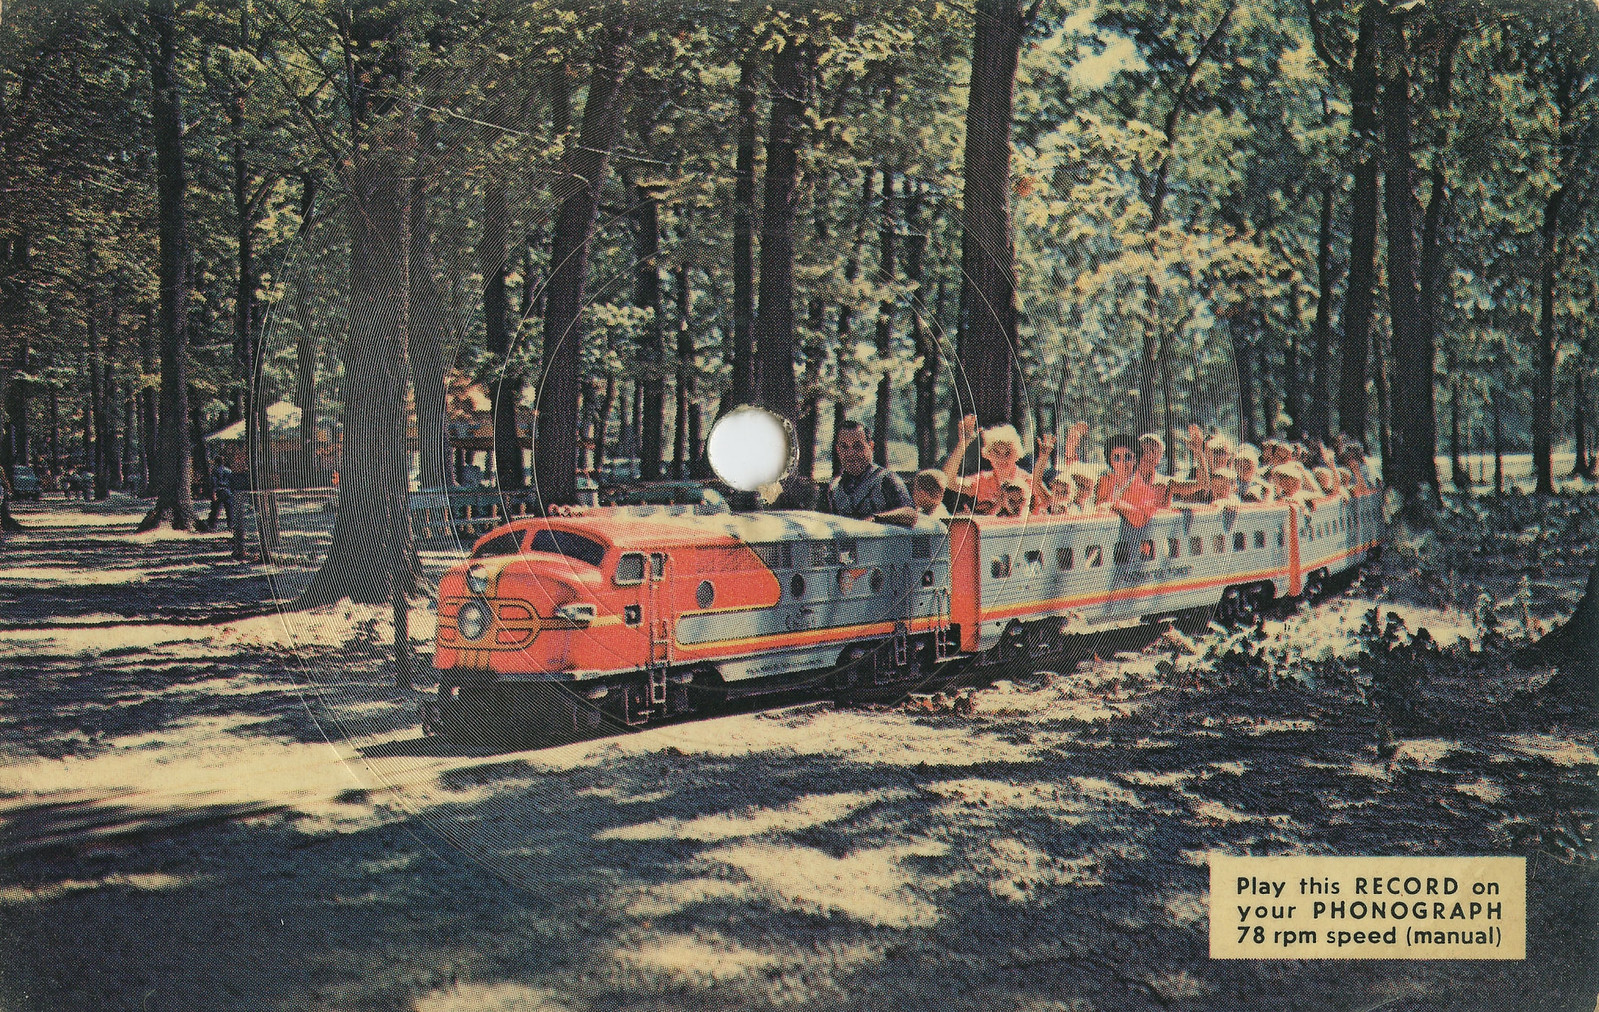 Train Ride at Enchanted Forest Amusement Park, circa 1970s - Chesterton, Indiana